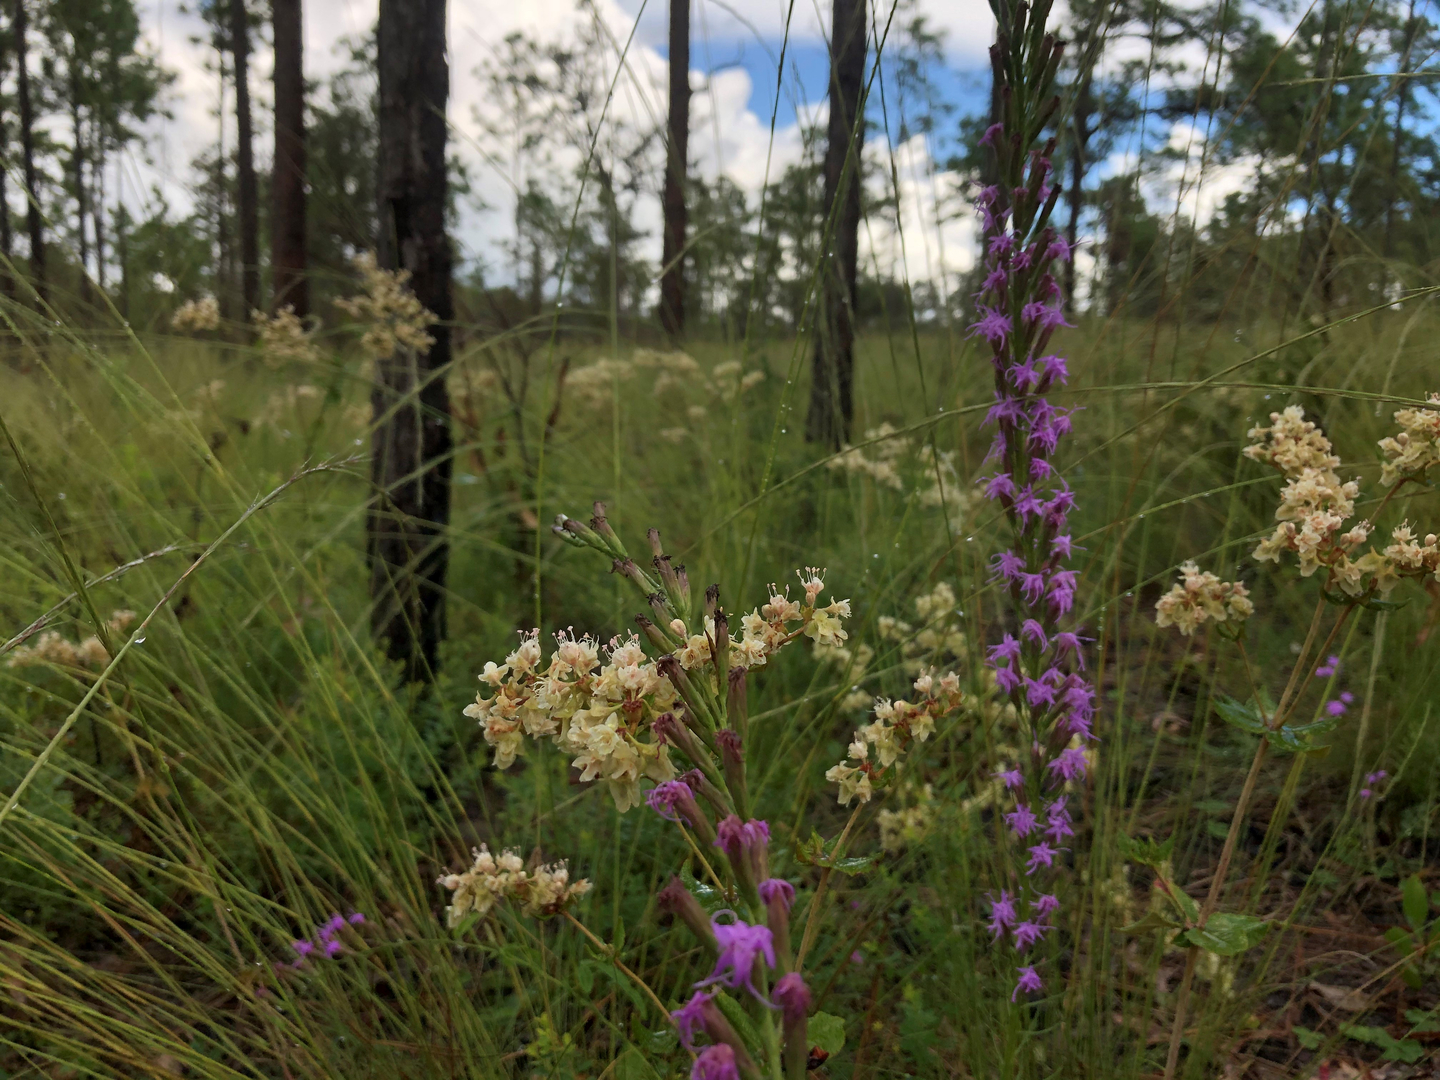 Wildflowers growing among the wiregrass in a healthy upland pine community.